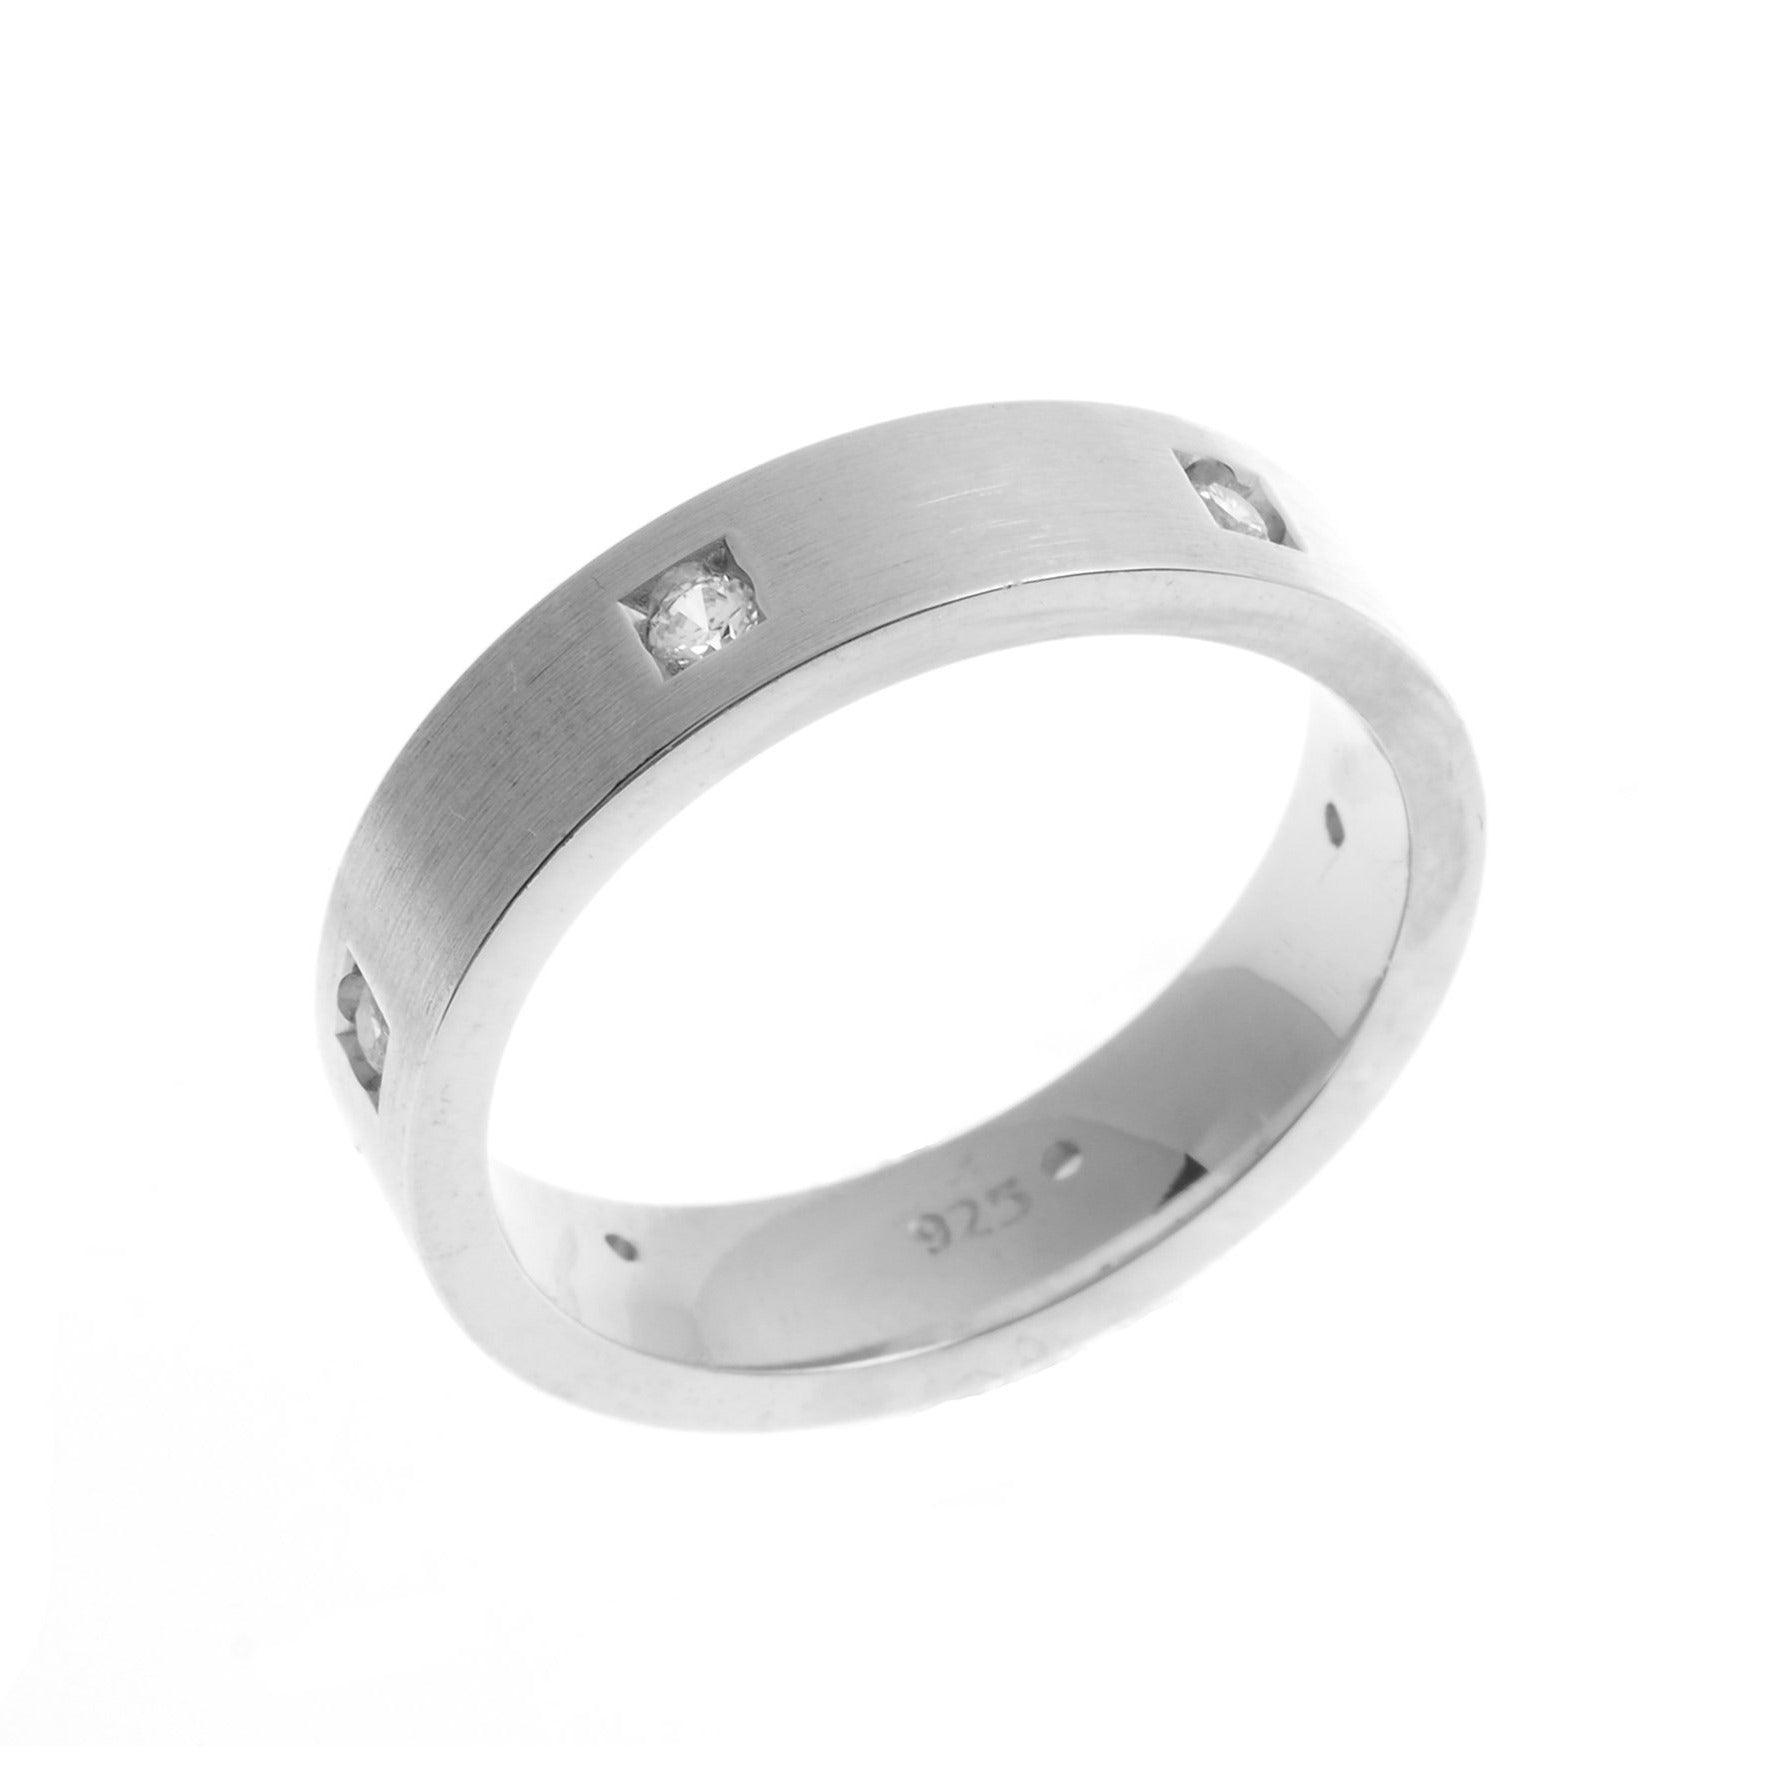 Brushed Sterling Silver Gents Wedding Band with Cubic Zirconia Stones BS0051 - Minar Jewellers